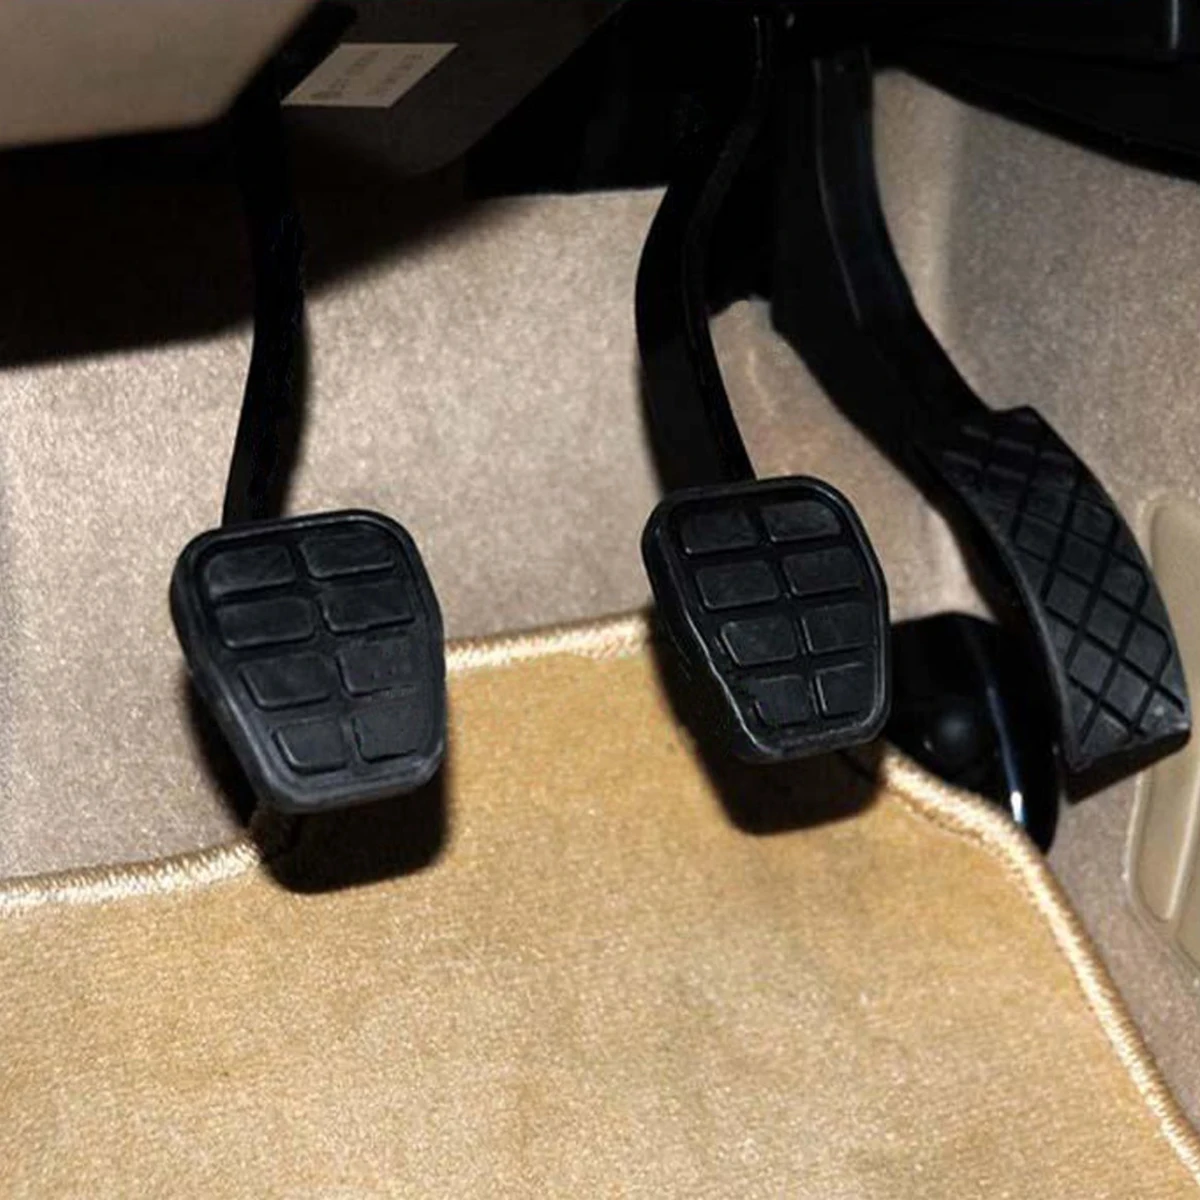 For SEAT Ibiza Mk1 021A Mk2 6K 1984 - 1999 2000 2001 2002 Rubber Brake Clutch Foot Pedal Pad Covers 321721173 7213141 6X0721173A images - 6